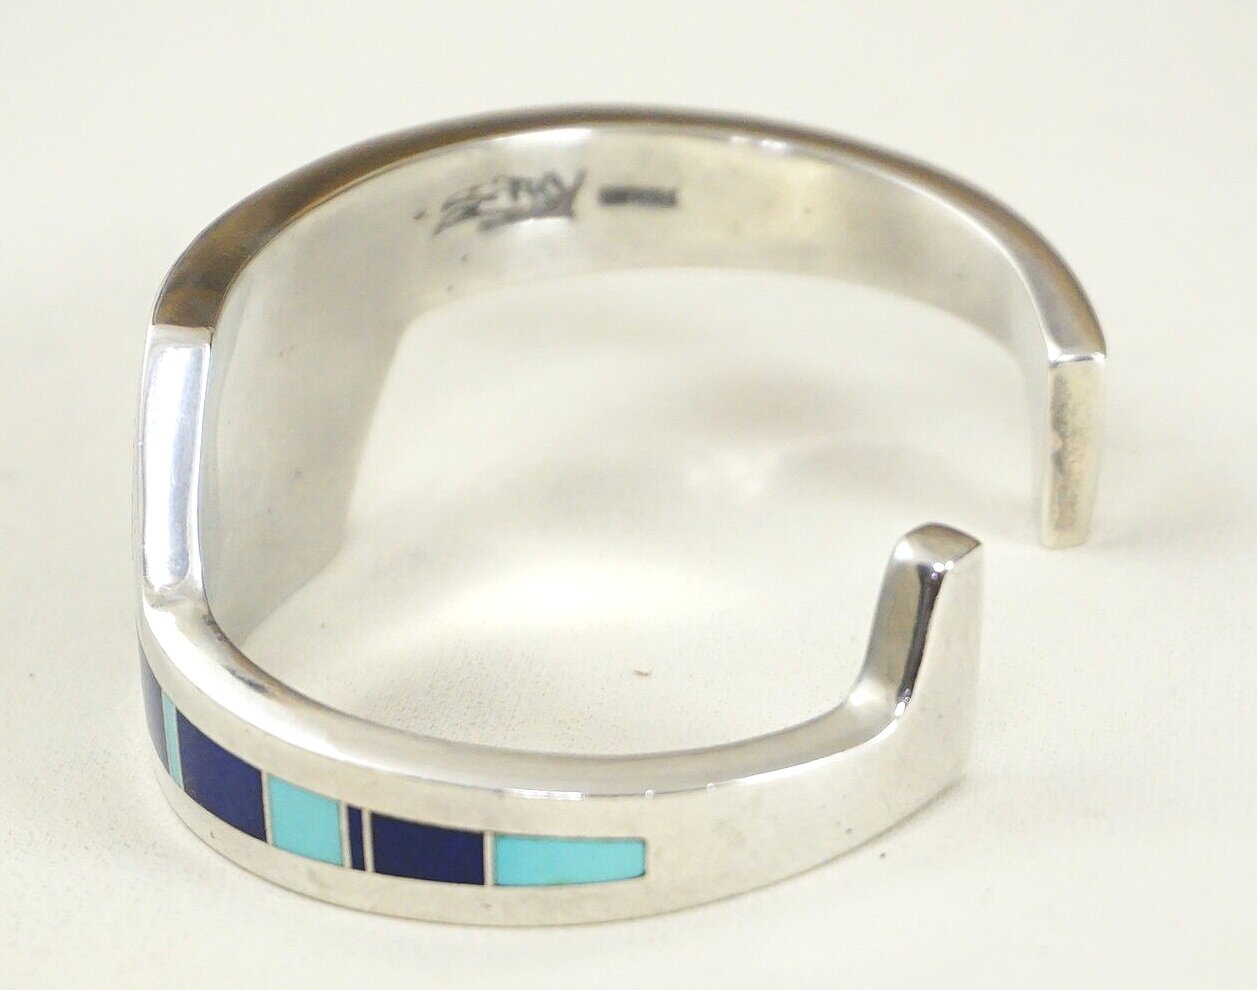 BOOQUA ZUNI STERLING MOP TURQUOISE CORAL INLAY CUFF BRACELET Details about   FABULOUS C M 